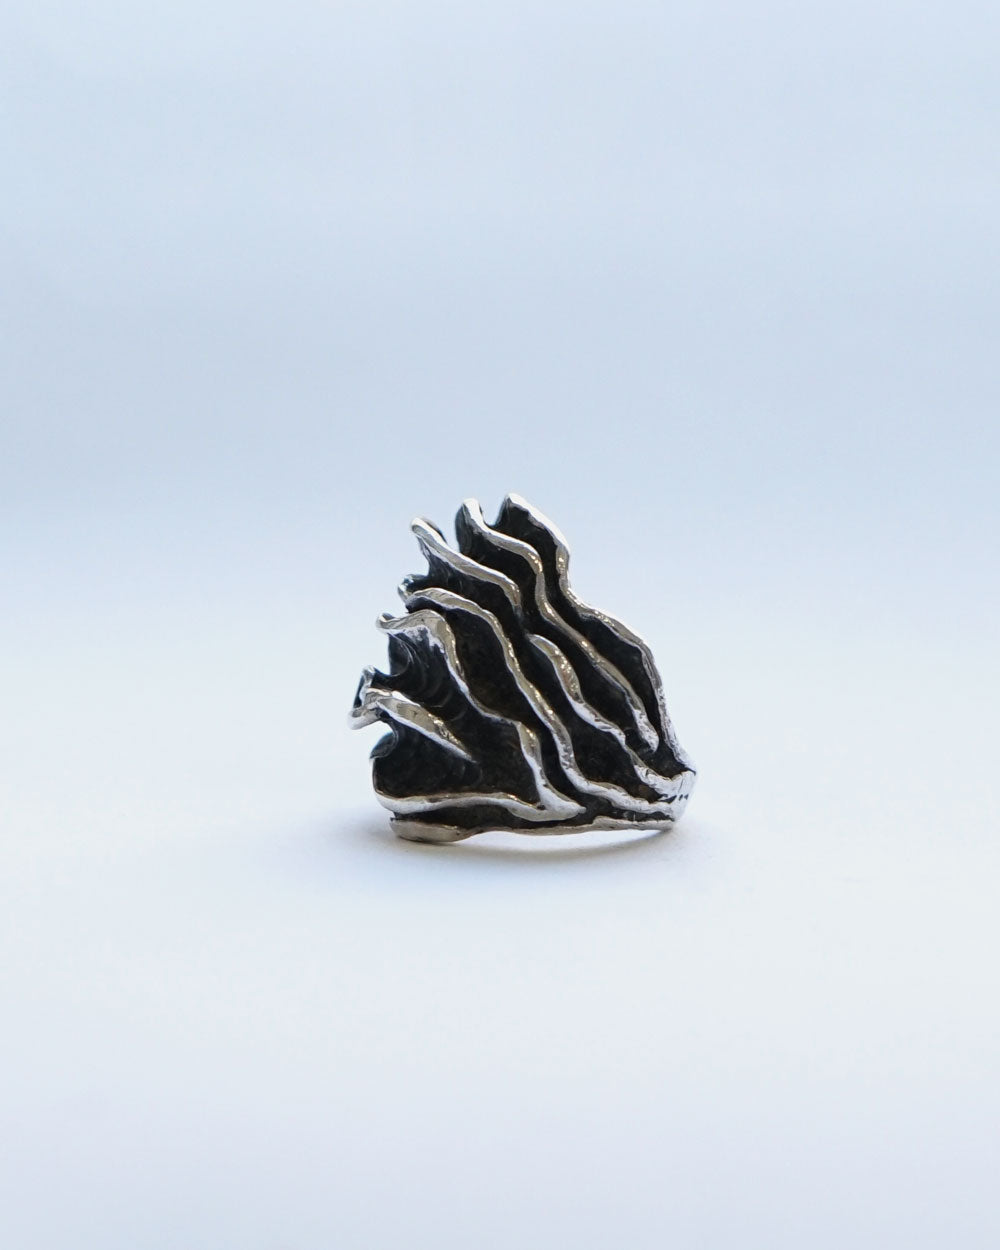 Silver Ring / size: 6.25